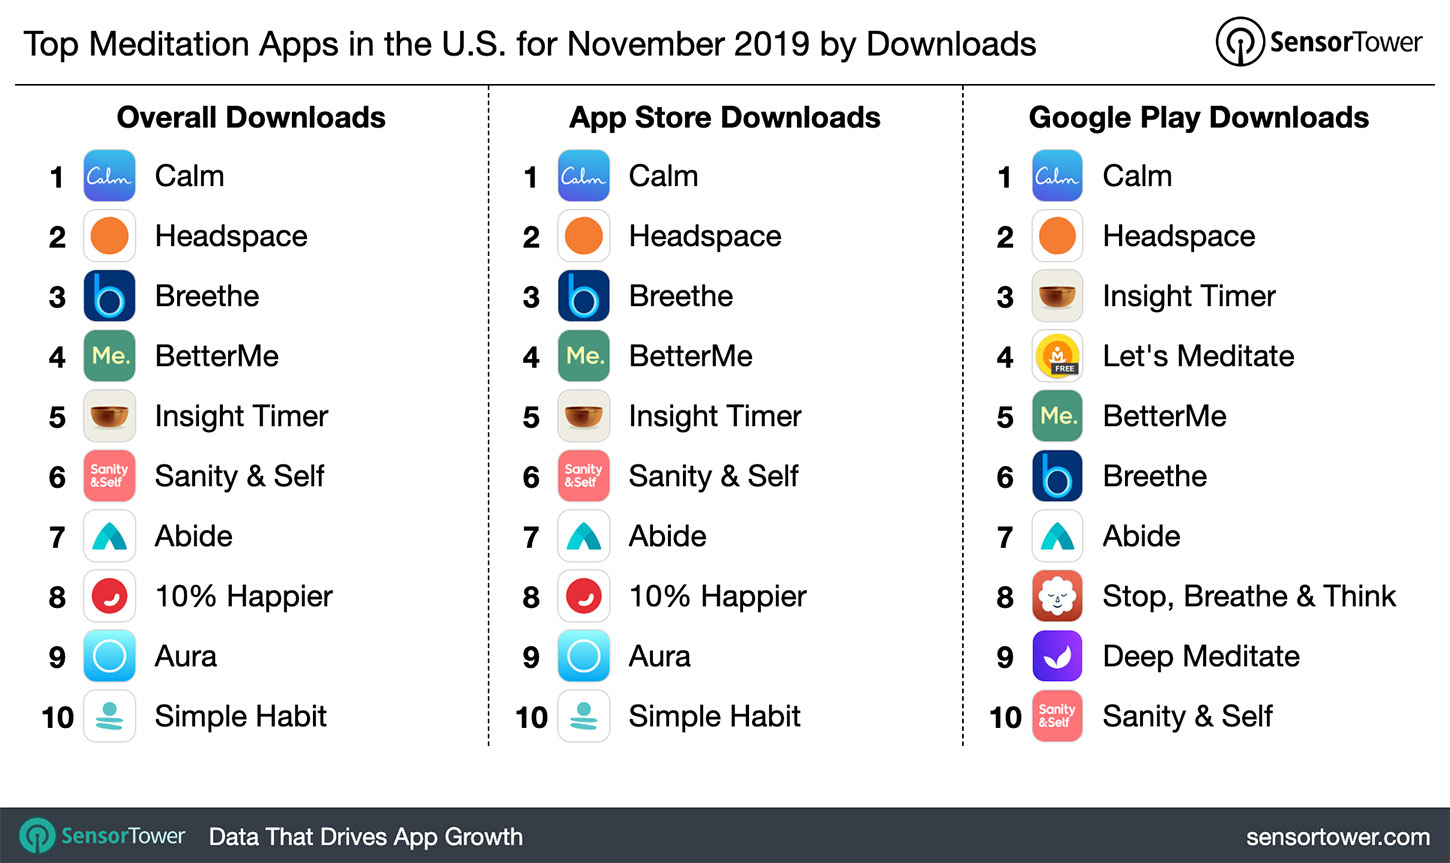 Top Meditation Apps in the U.S. for November 2019 by Downloads